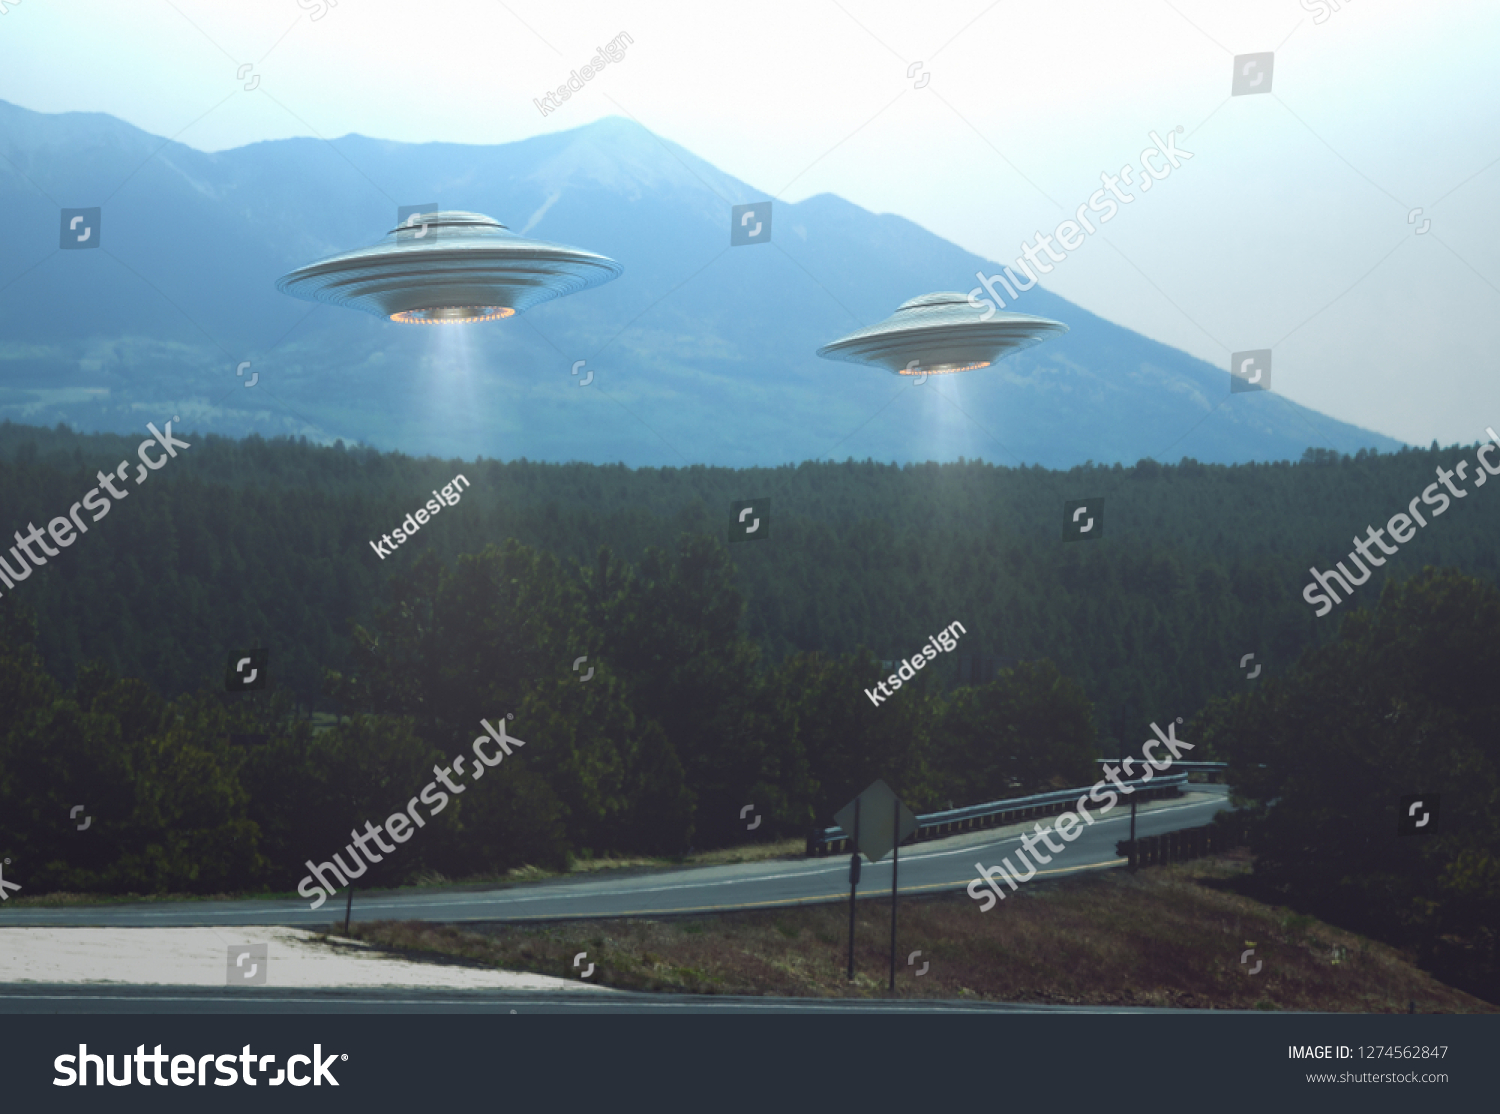 Unidentified flying object. Two UFOs flying over a road among the trees. 3D illustration. #1274562847